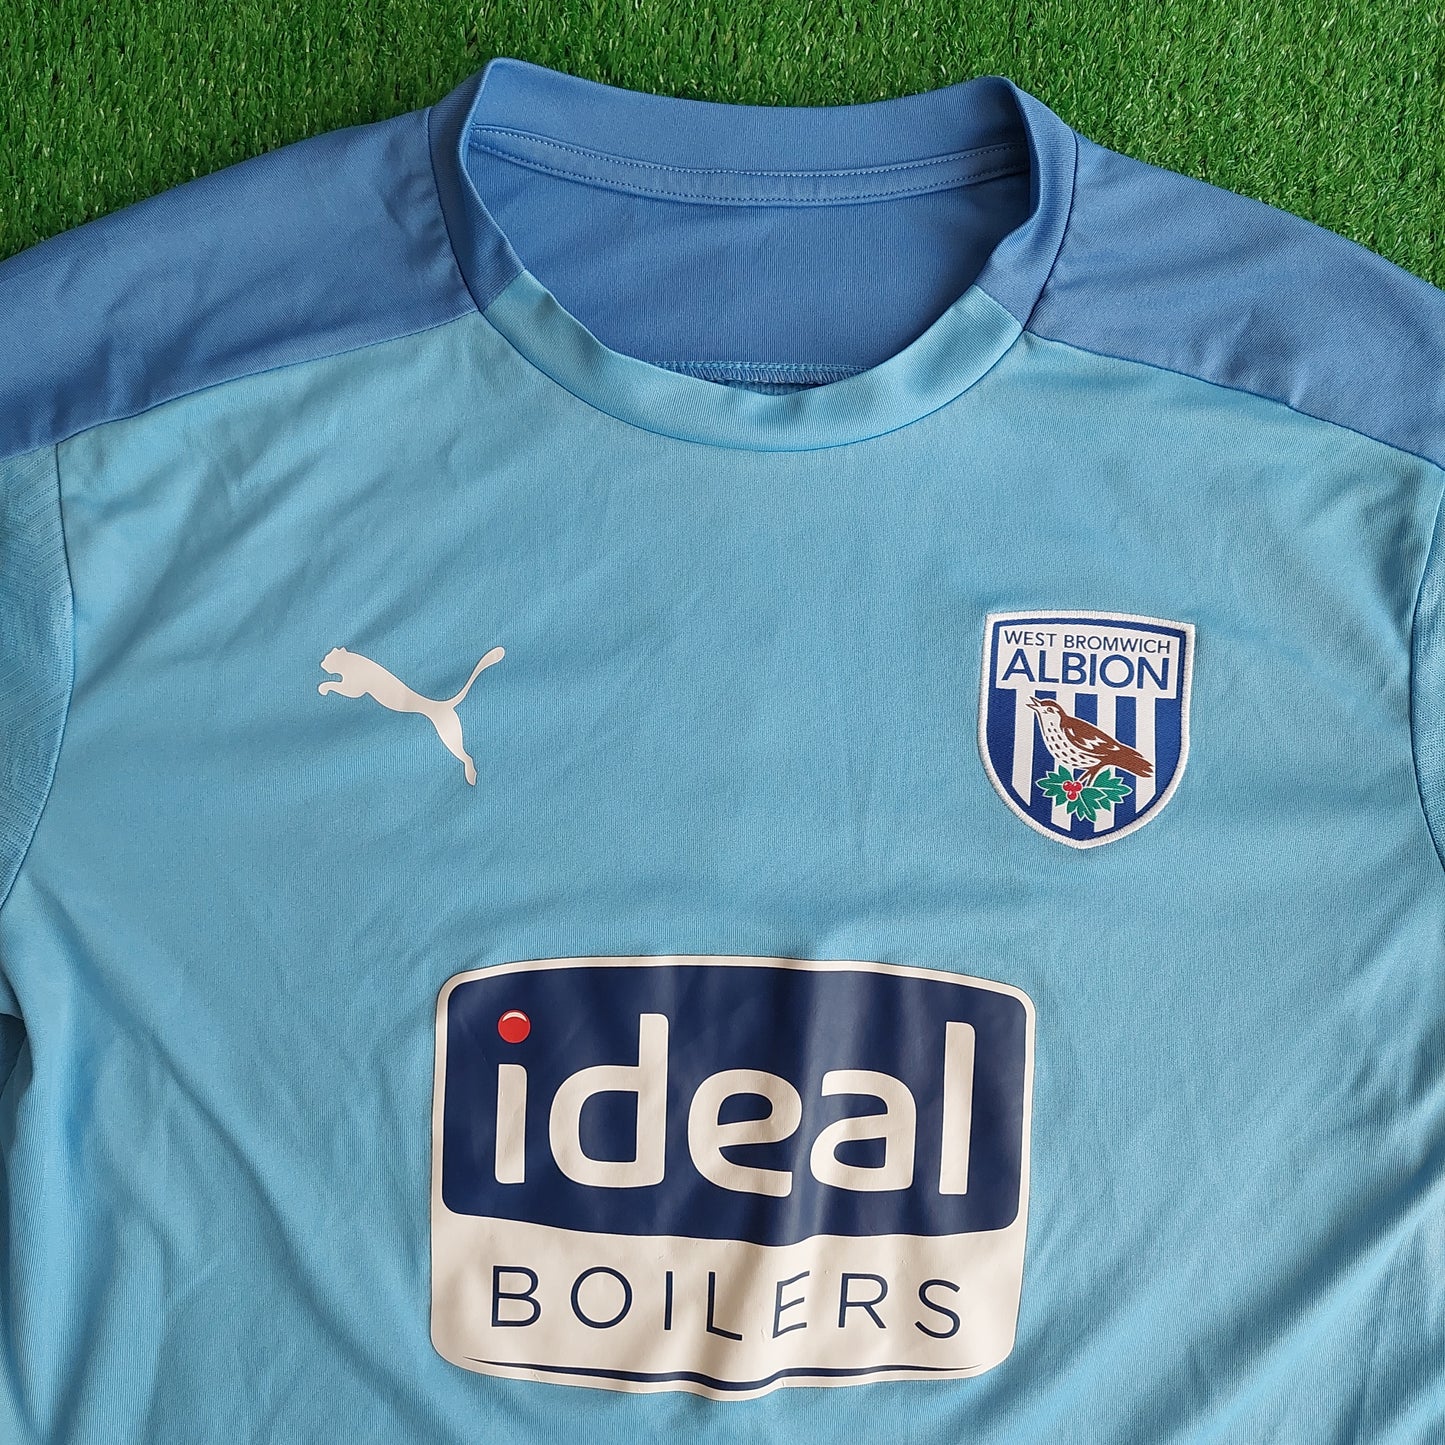 West Bromwich Albion 2018/19 Training Shirt (Very Good) - Size M